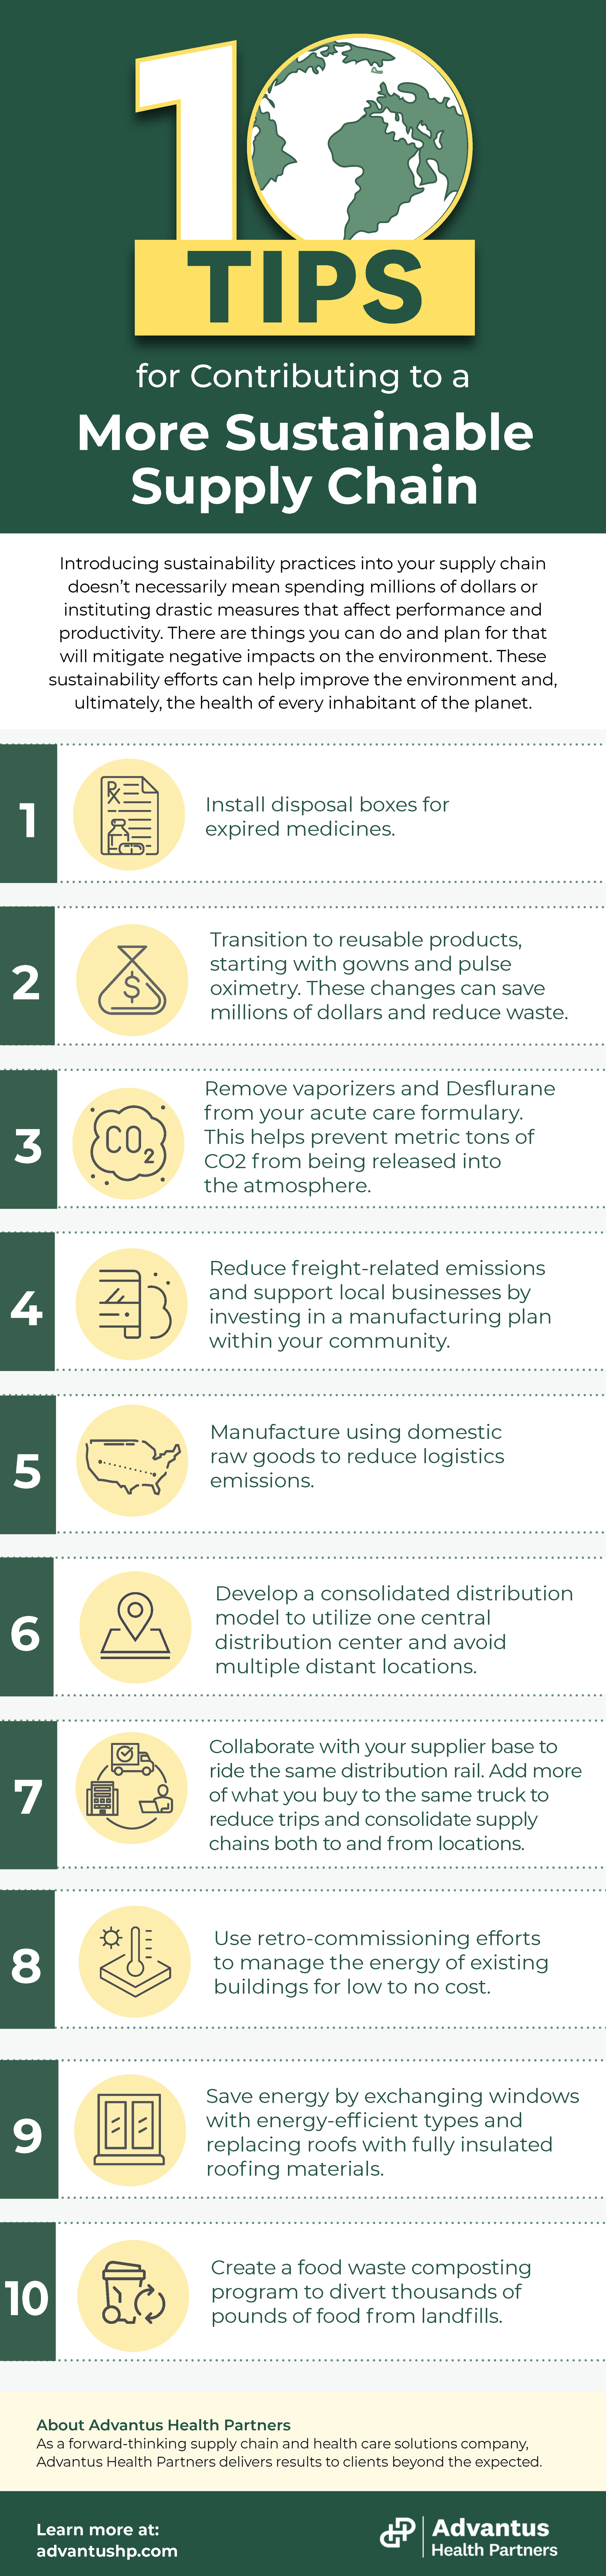 Infographic with 10 tips for making a more sustainable supply chain